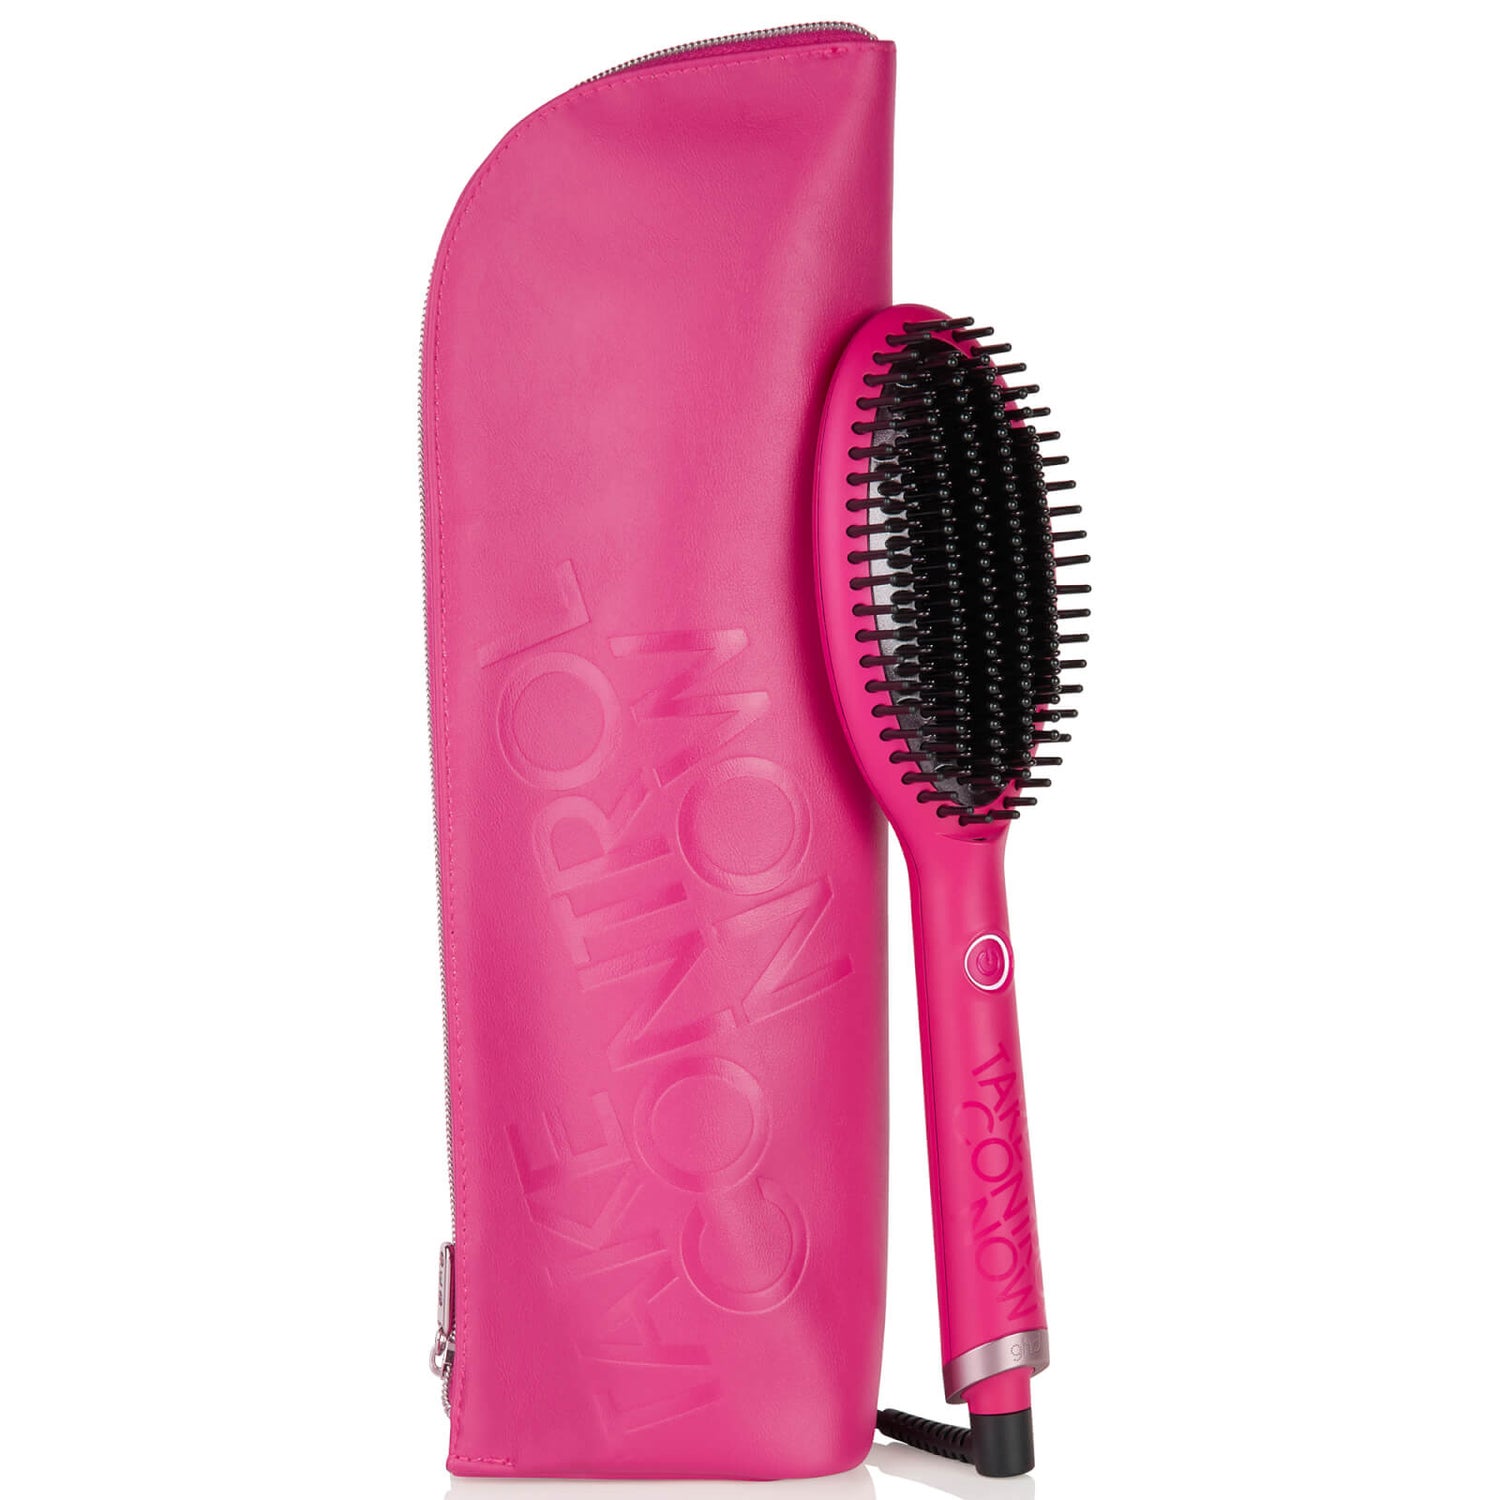 ghd Glide Smoothing Hot Brush in Orchid Pink